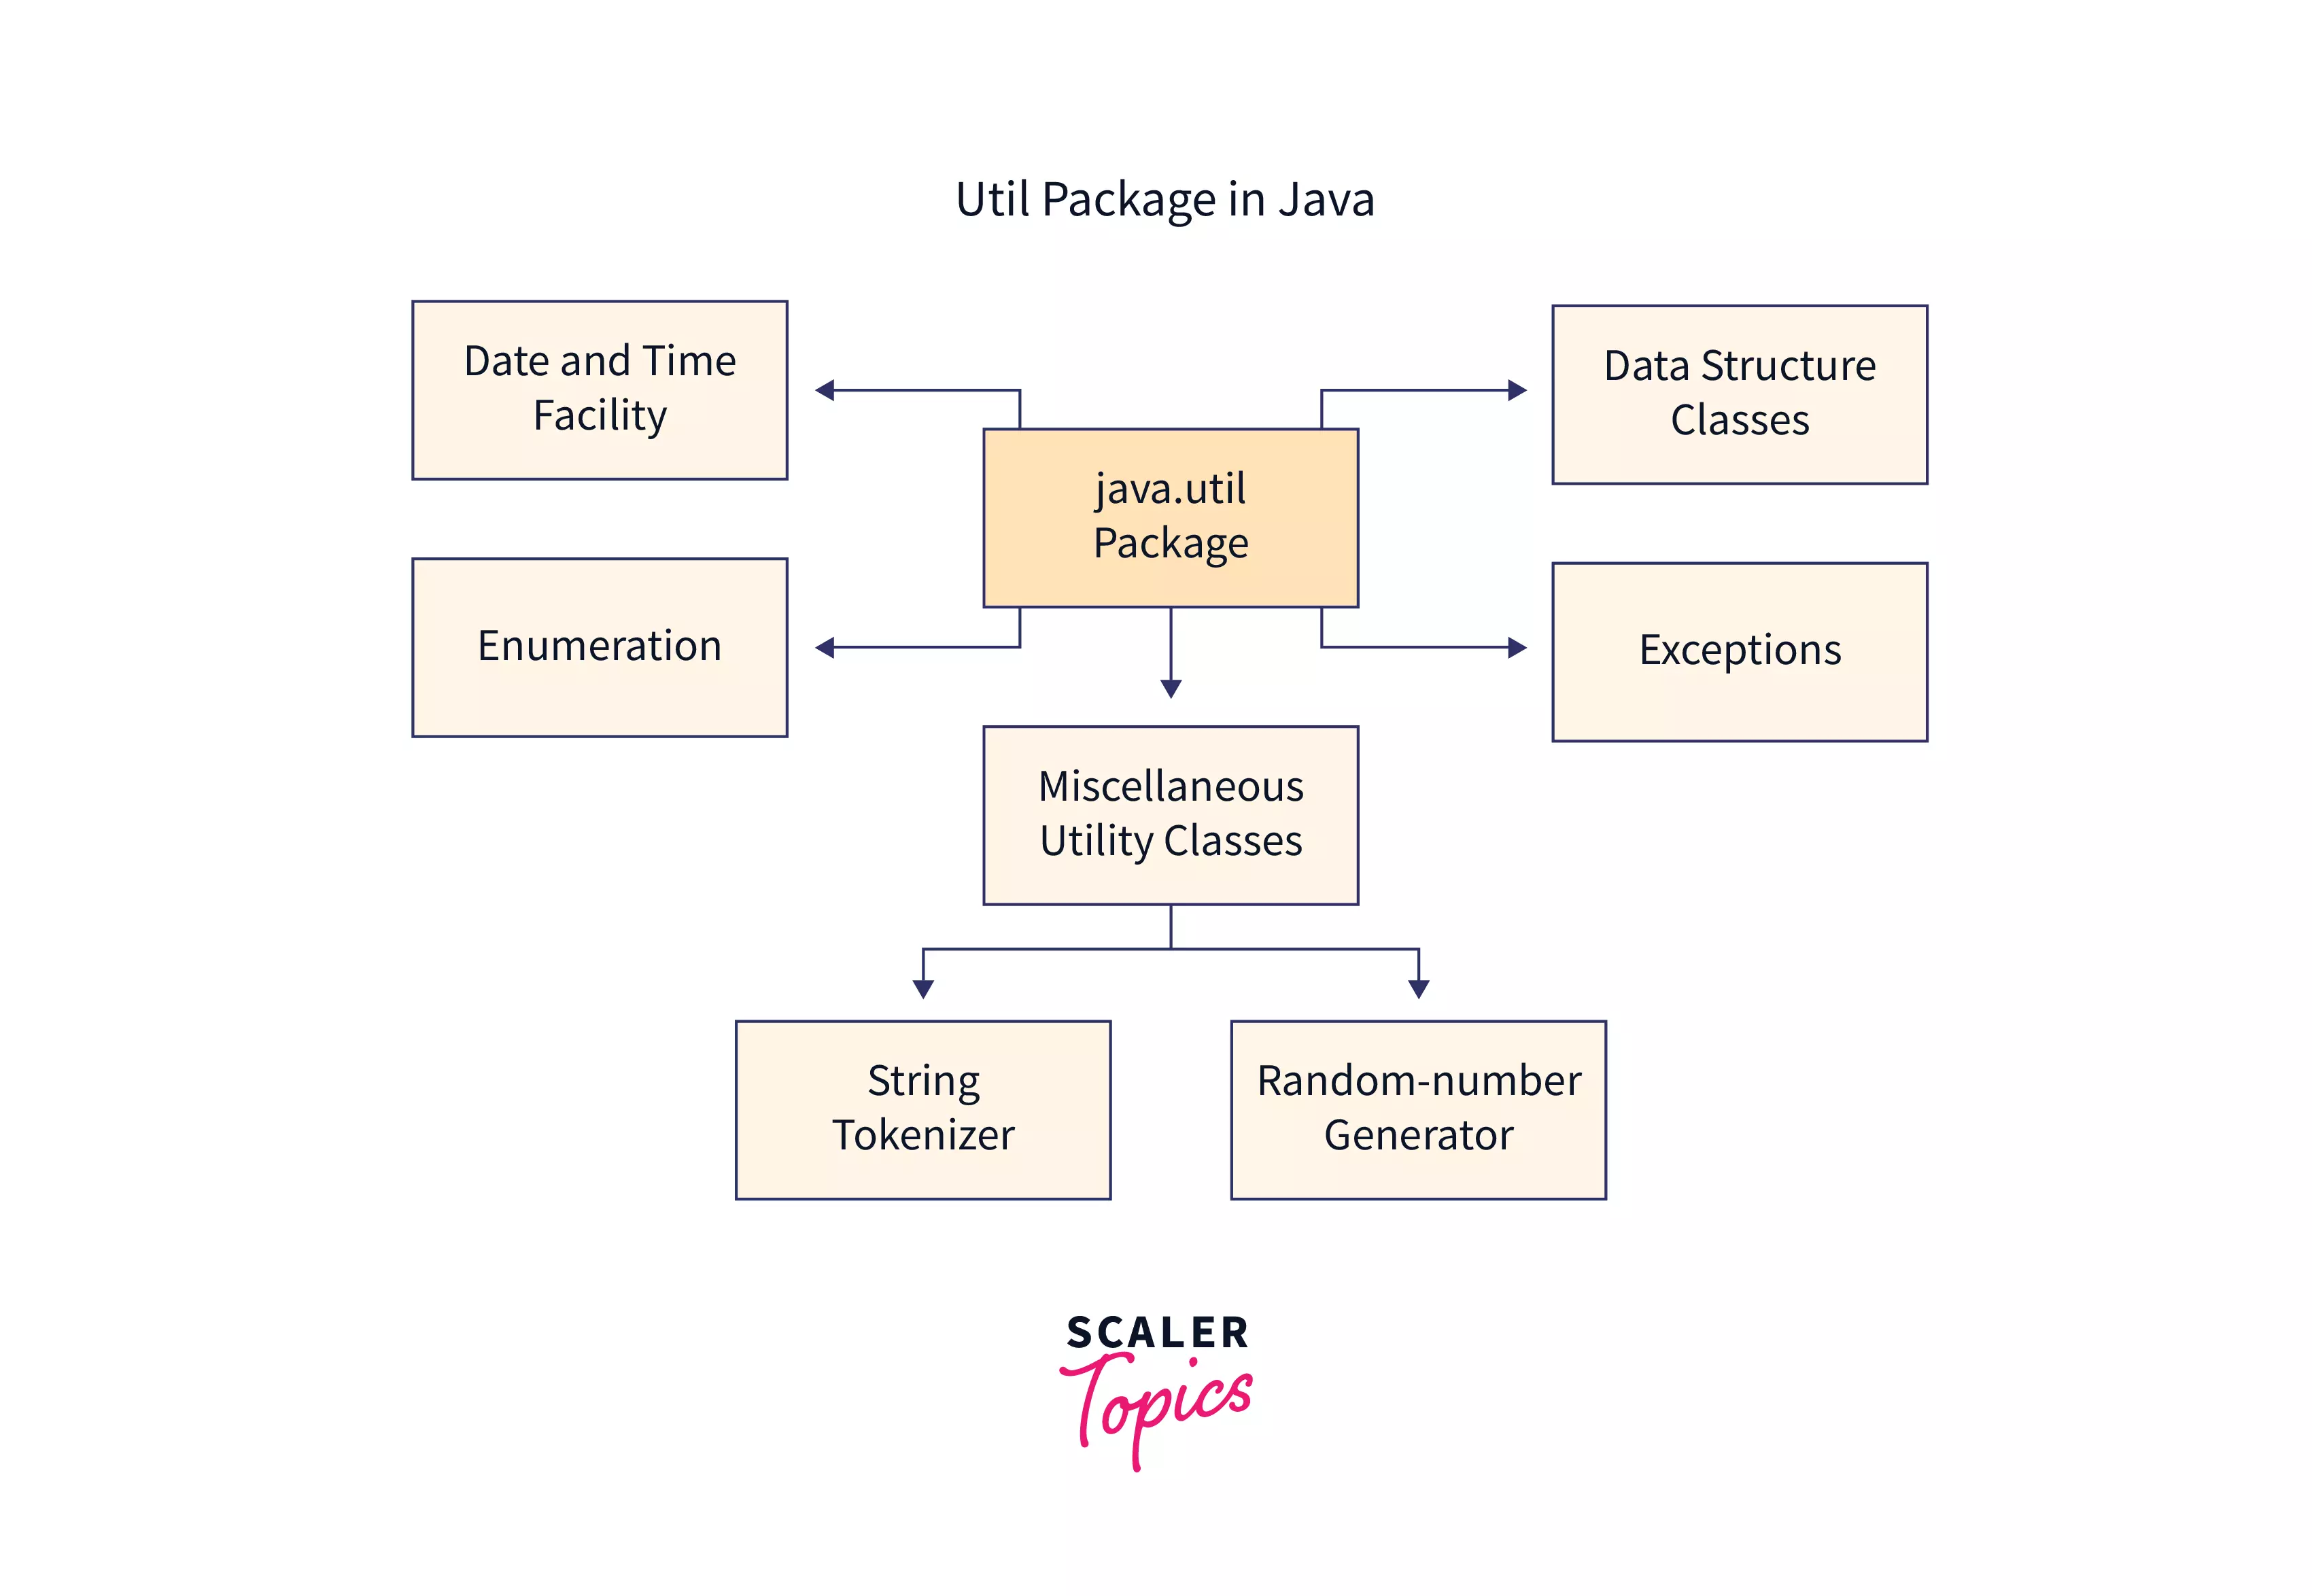 Components of Java Util Package